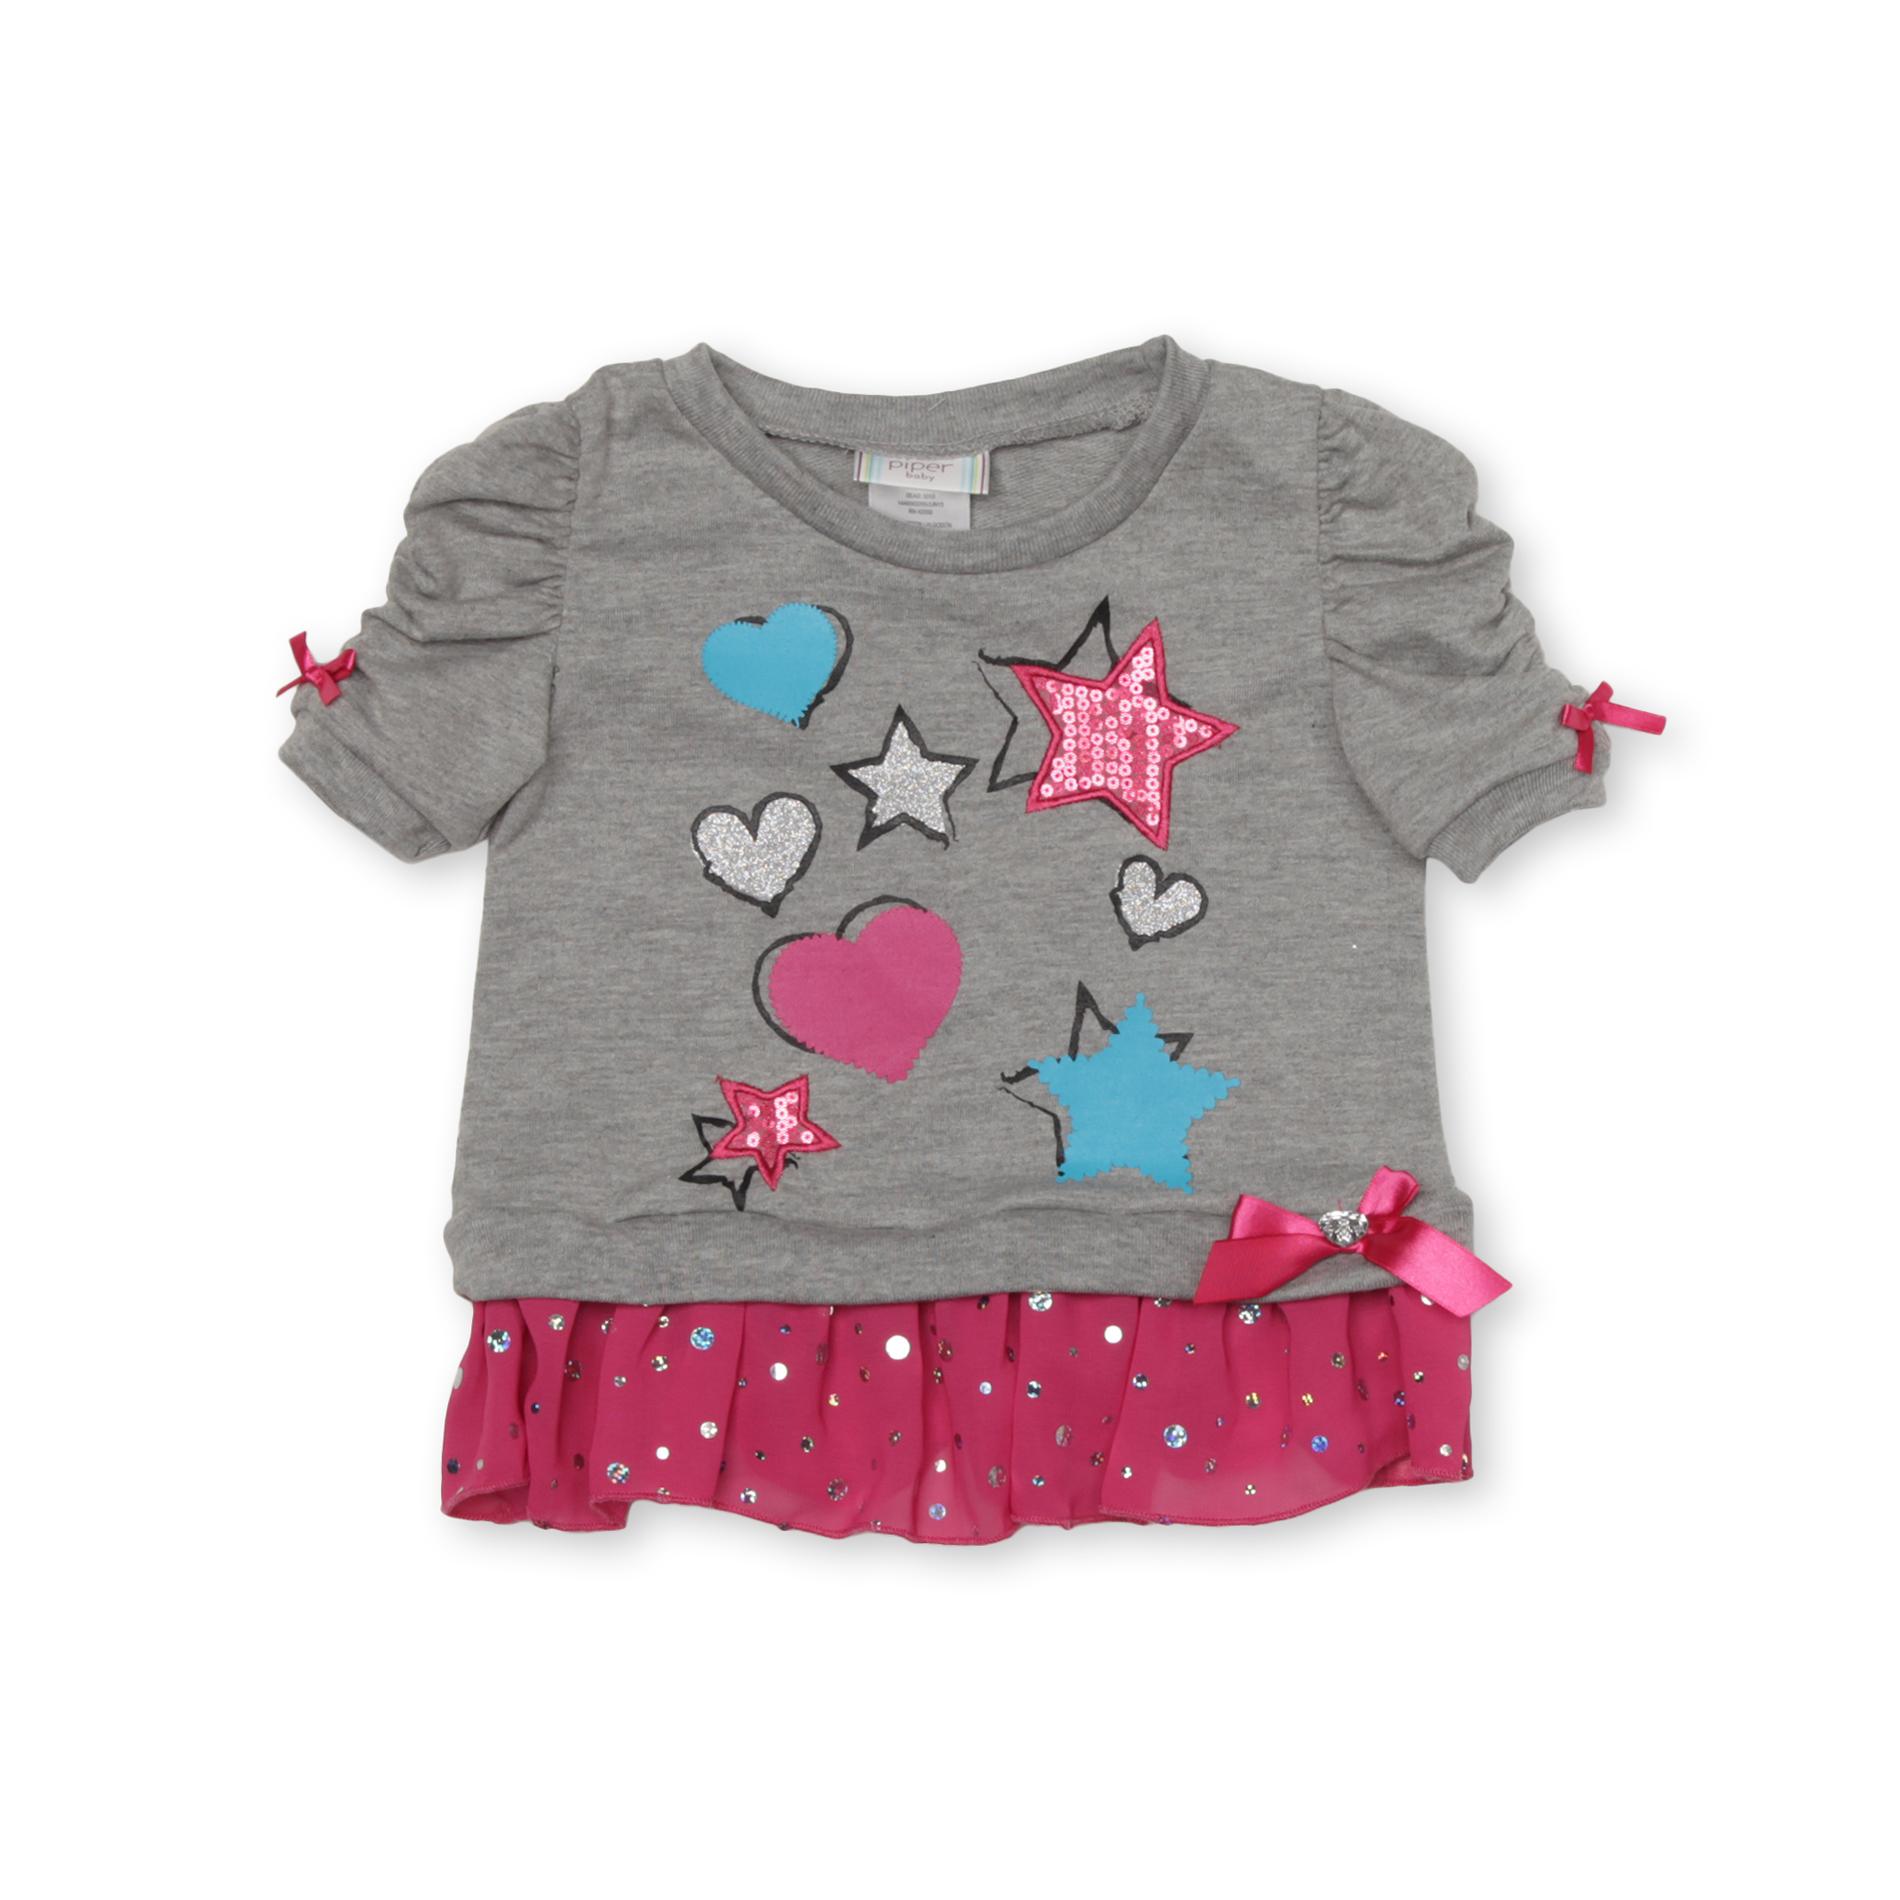 Piper Infant & Toddler Girl's Tunic - Hearts & Stars